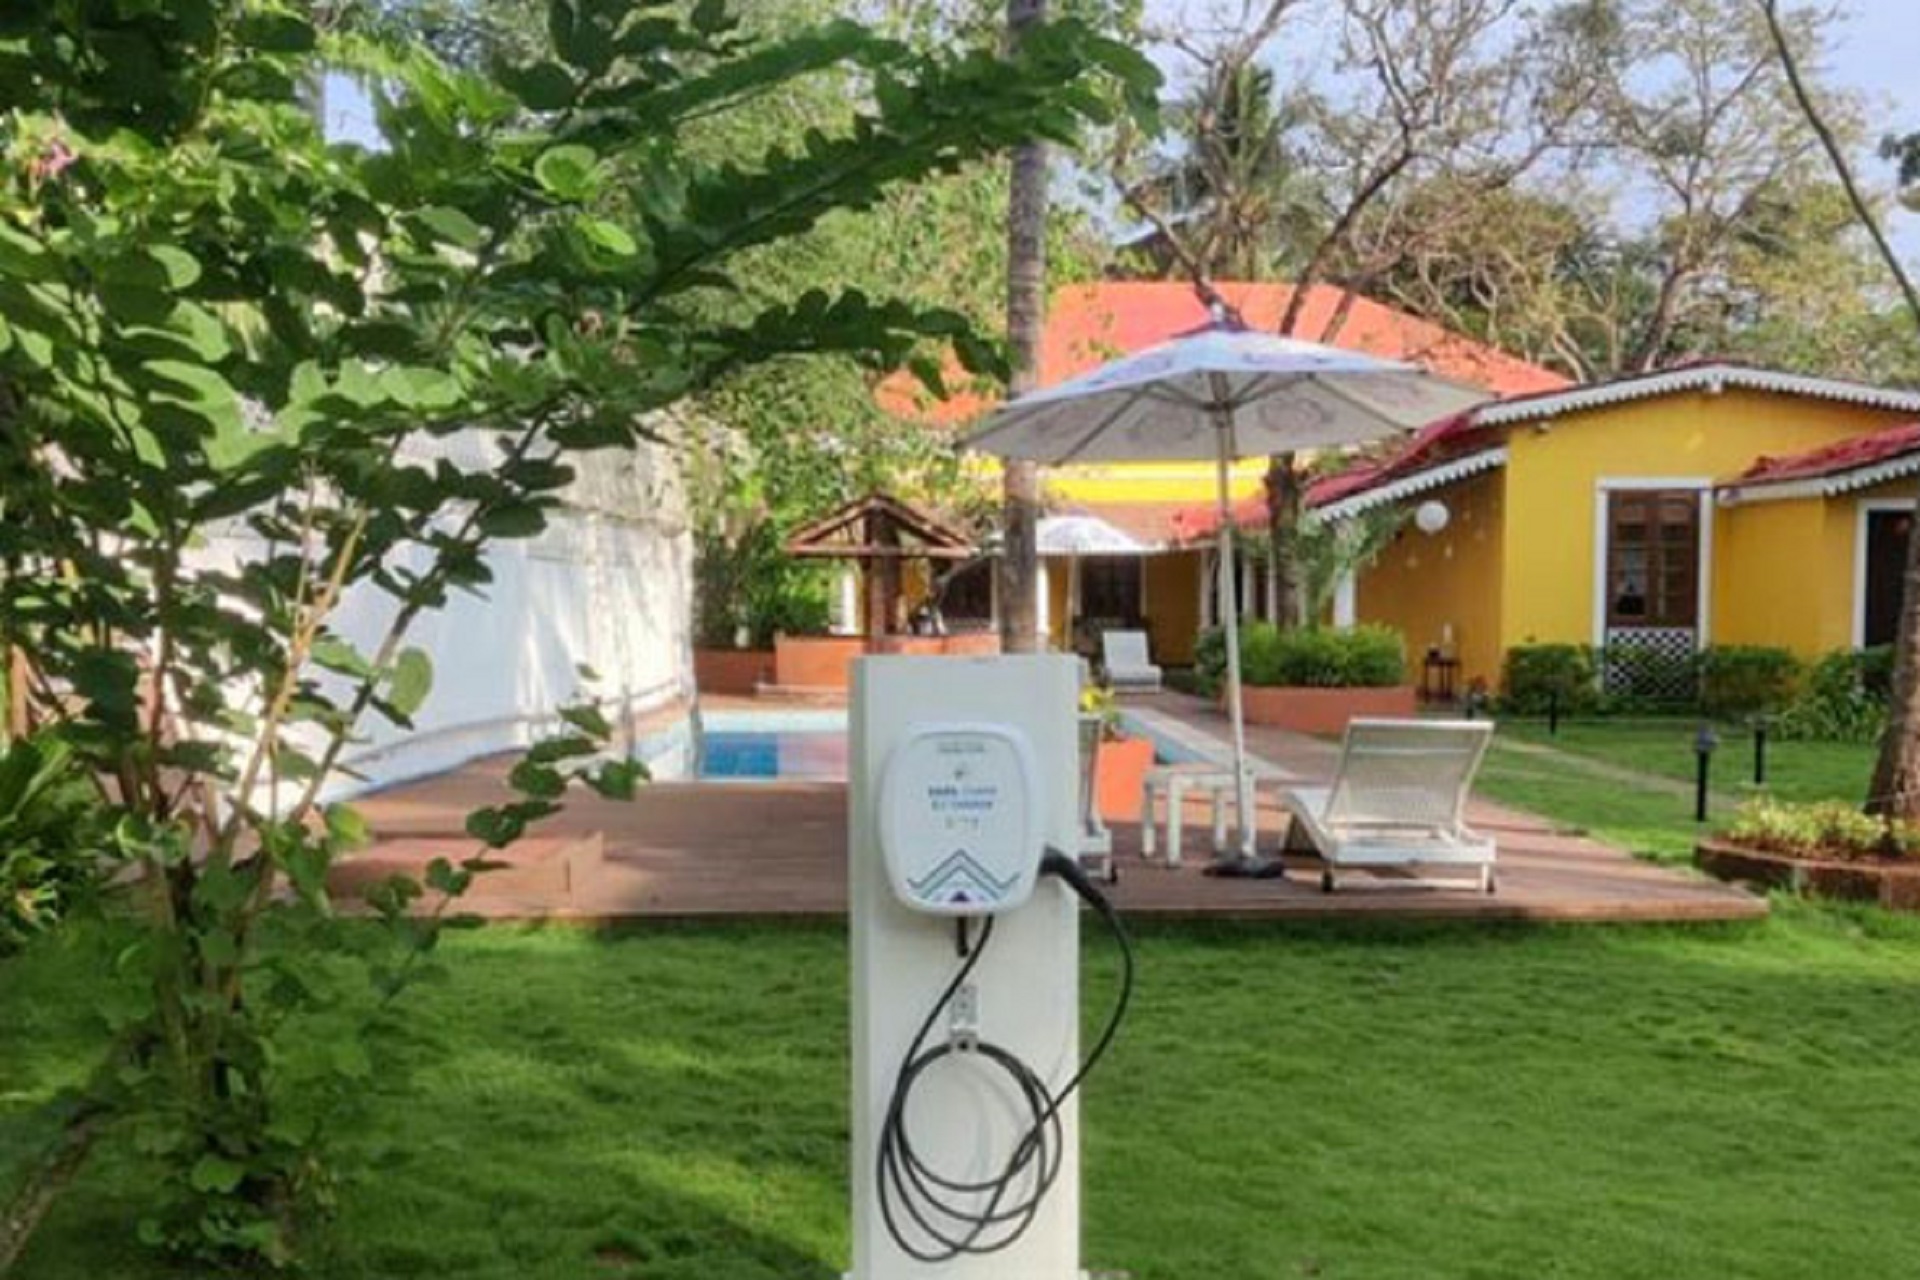 Tata Power, ama Stays & Trails Tie Up To Set Up EV Charging Stations